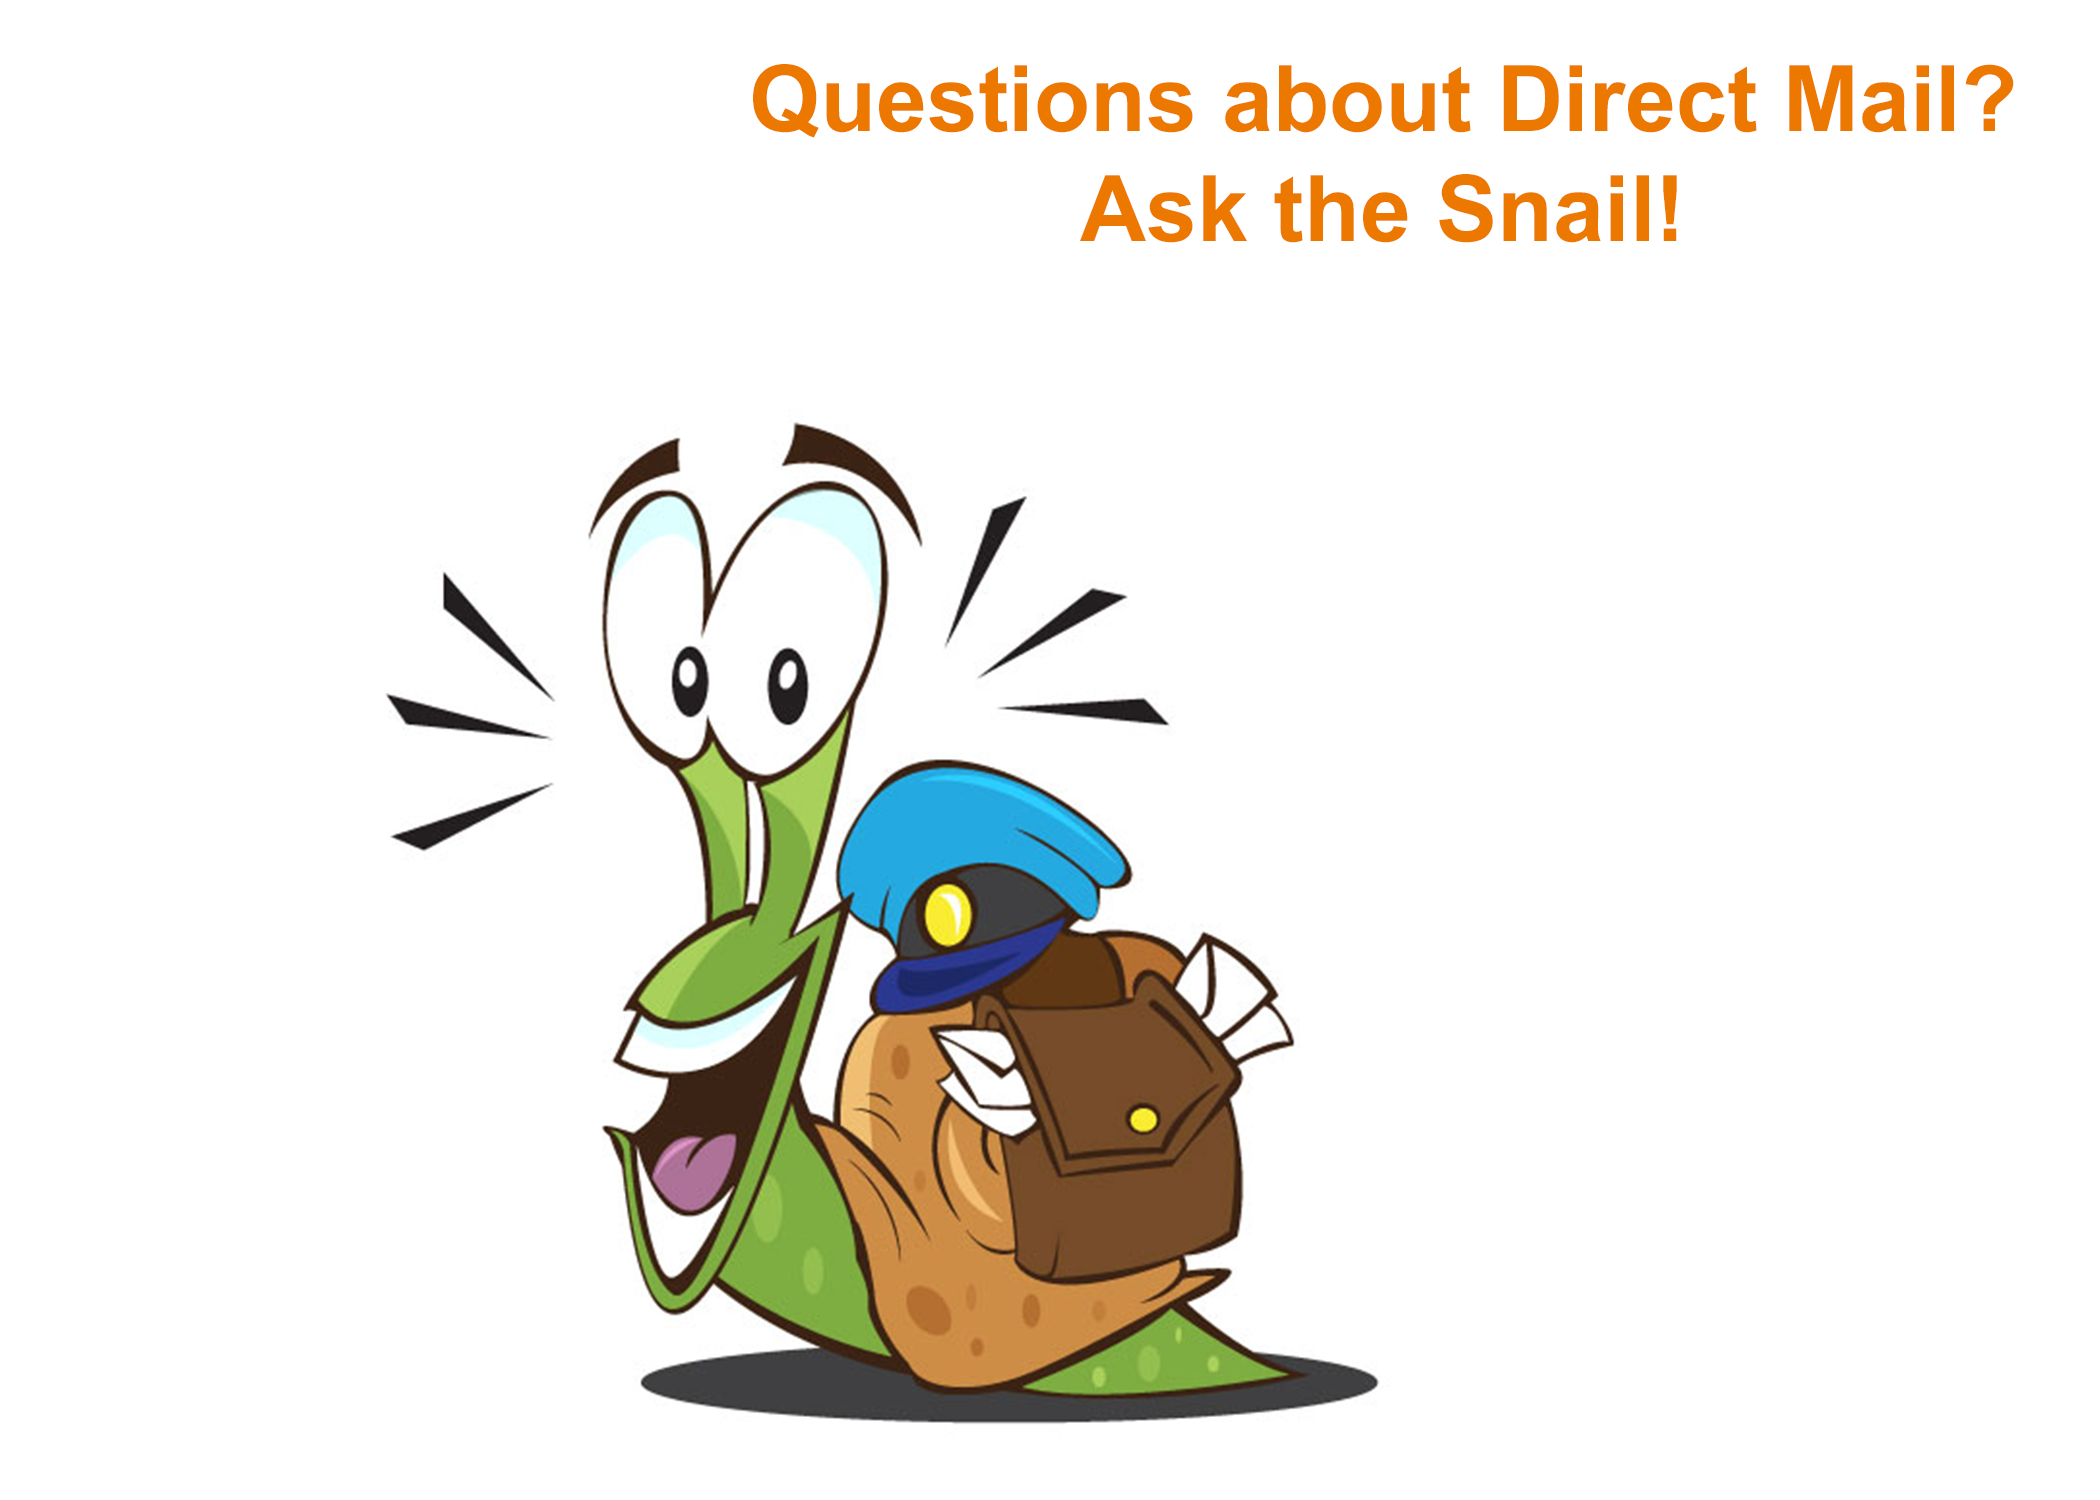 Ask the Snail! Back to School